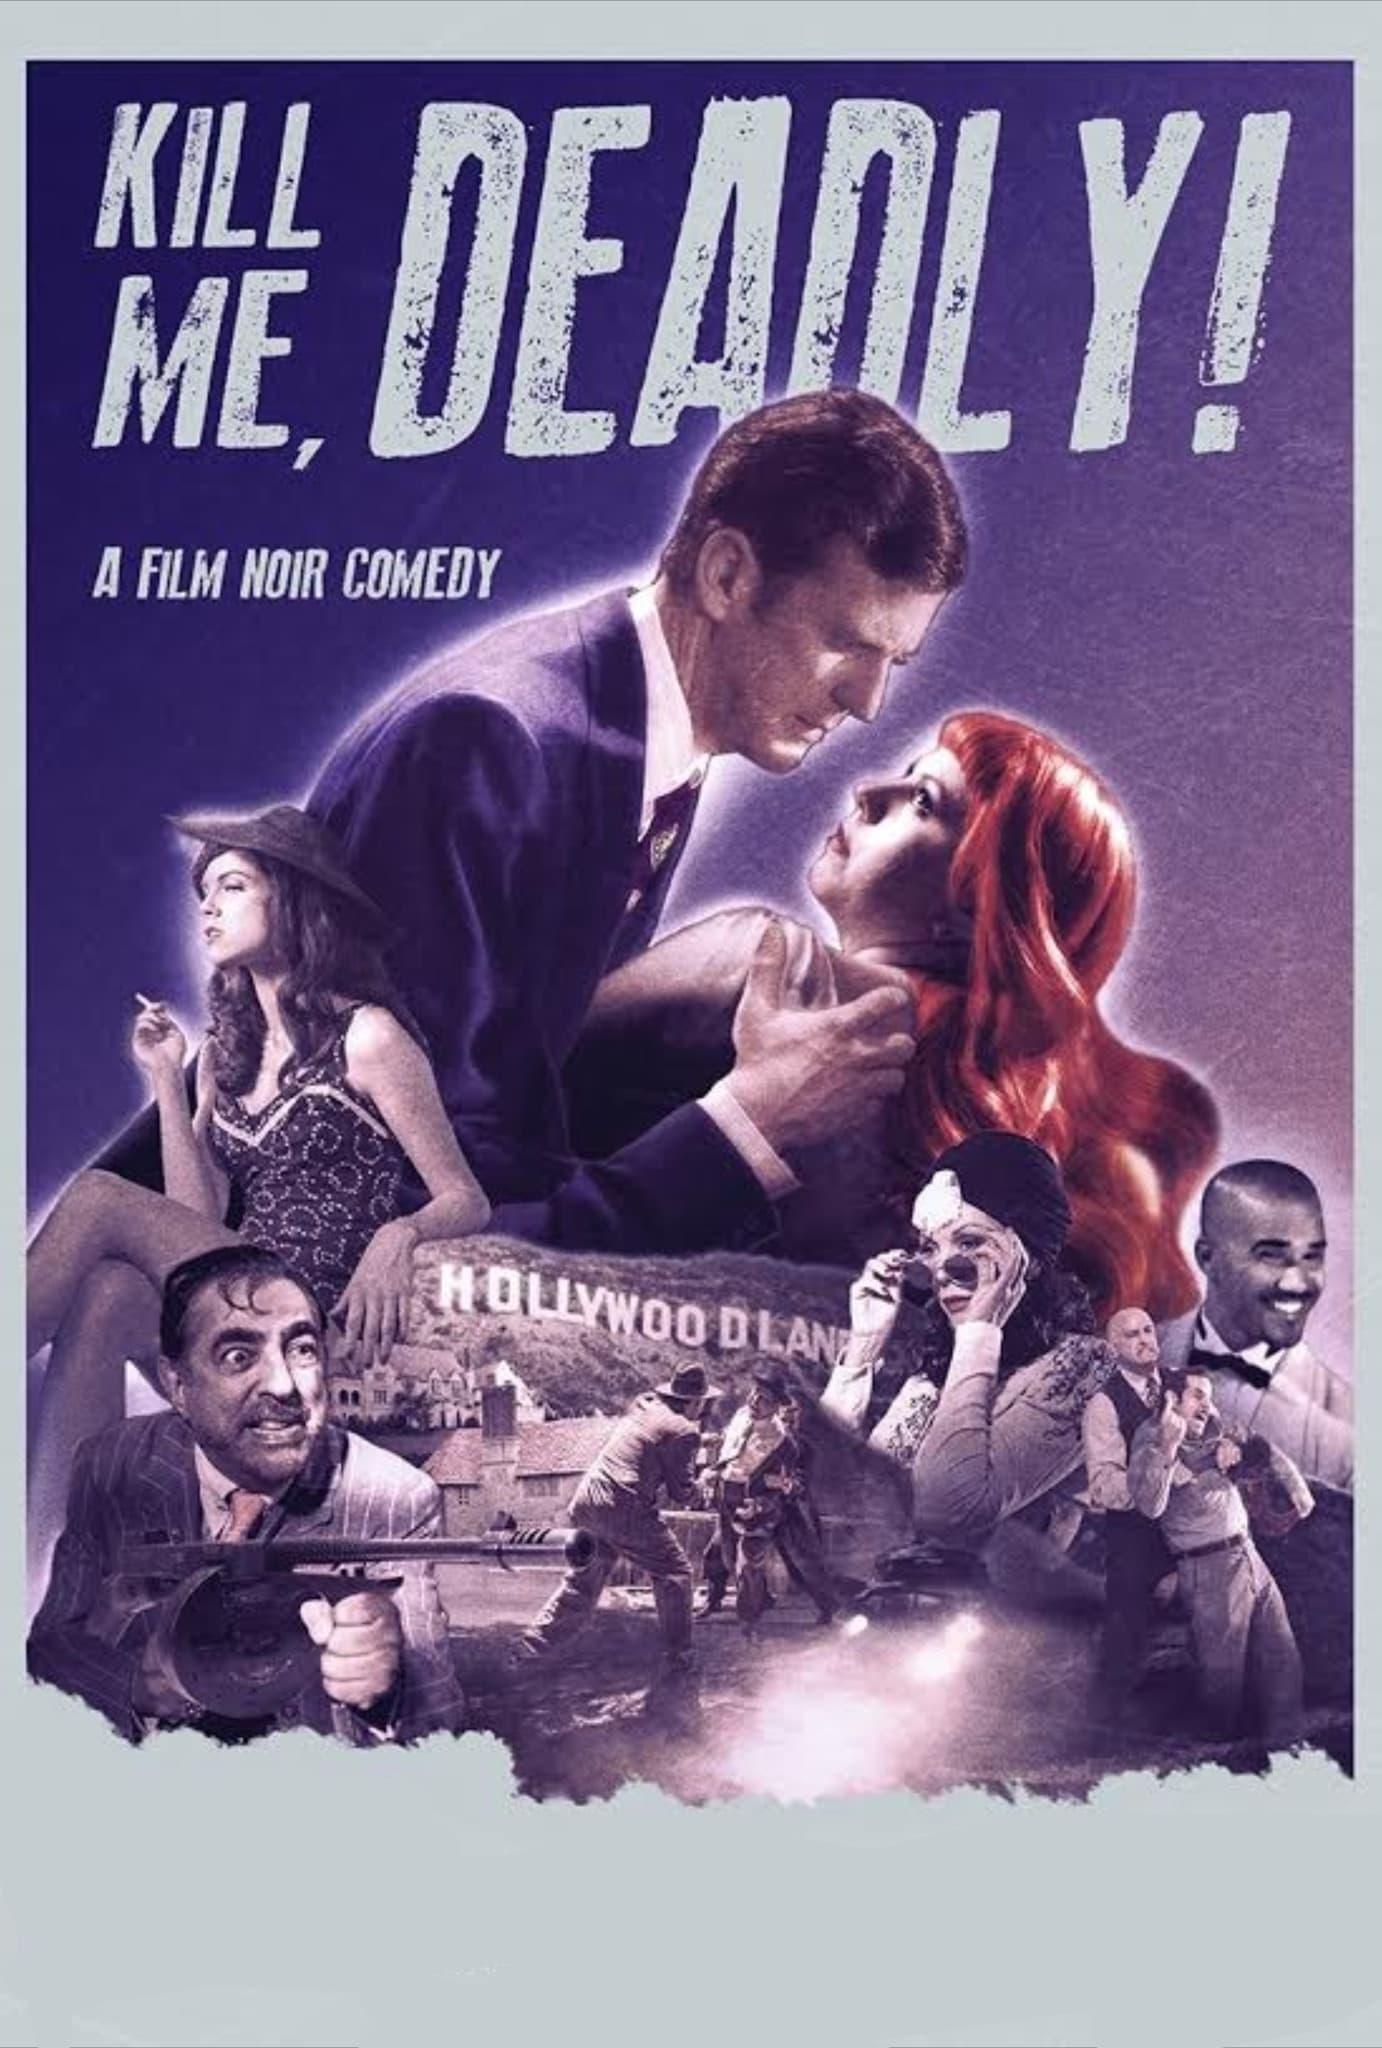 Kill Me, Deadly poster